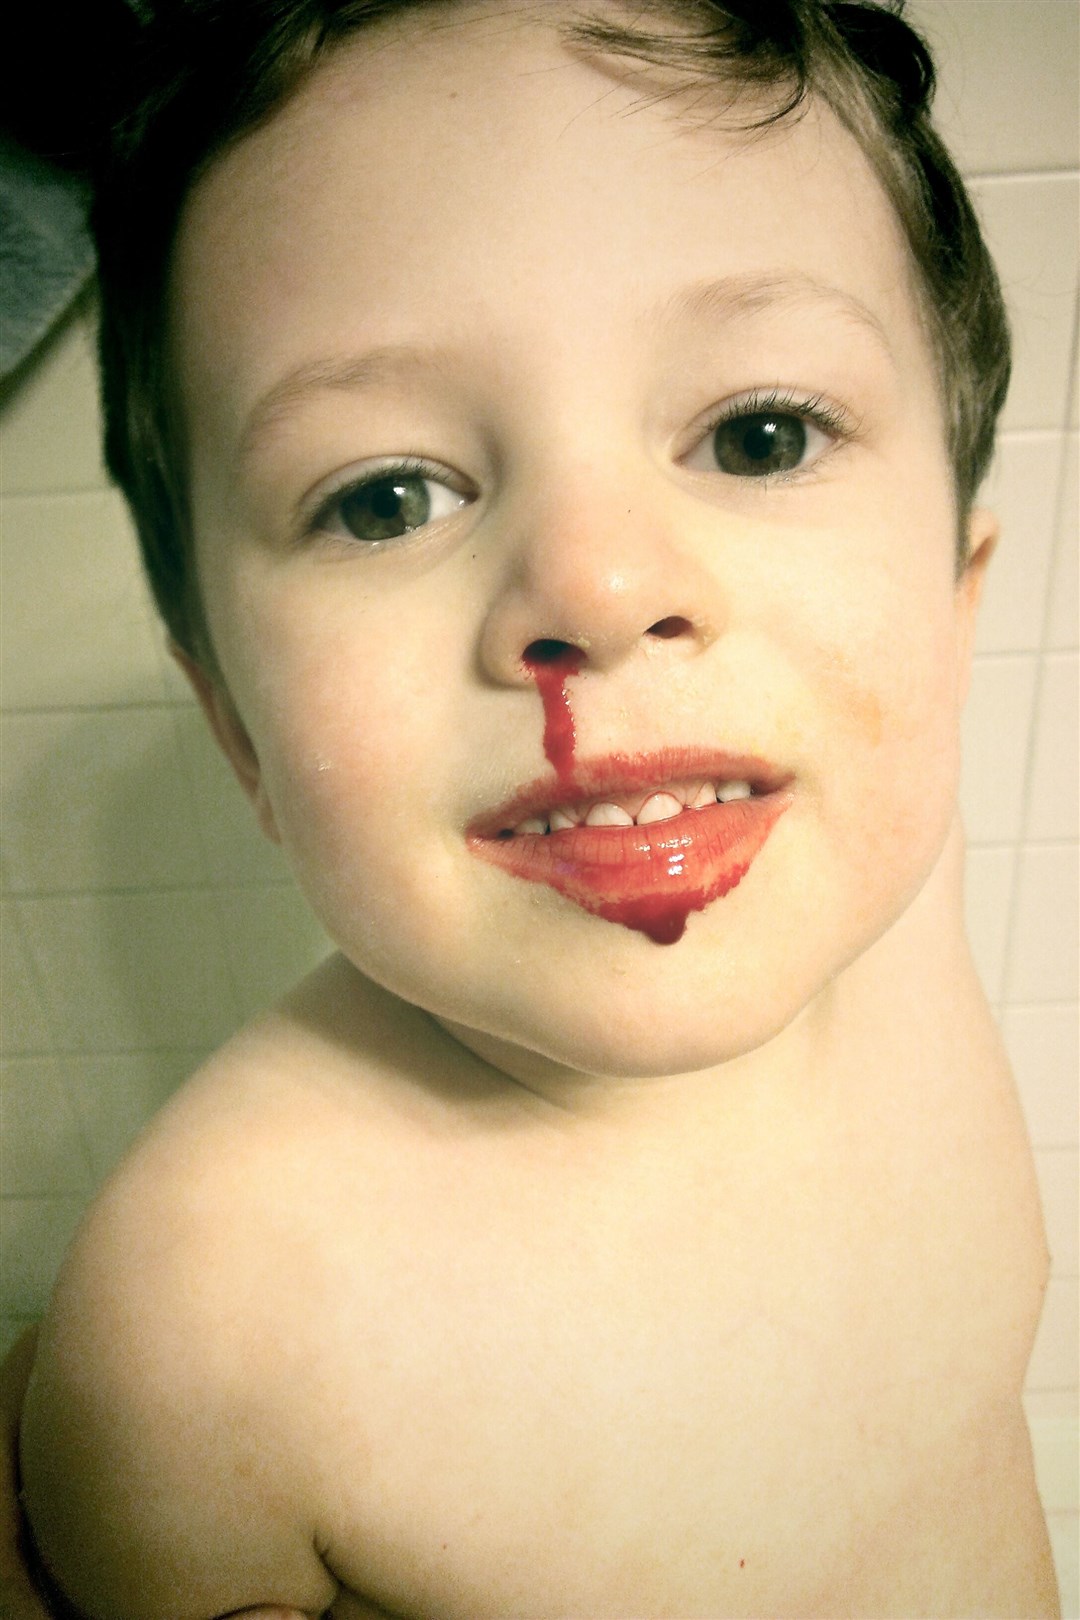 Nose bleeds can be common in children. Picture: Ragesoss, via Wikimedia Commons.